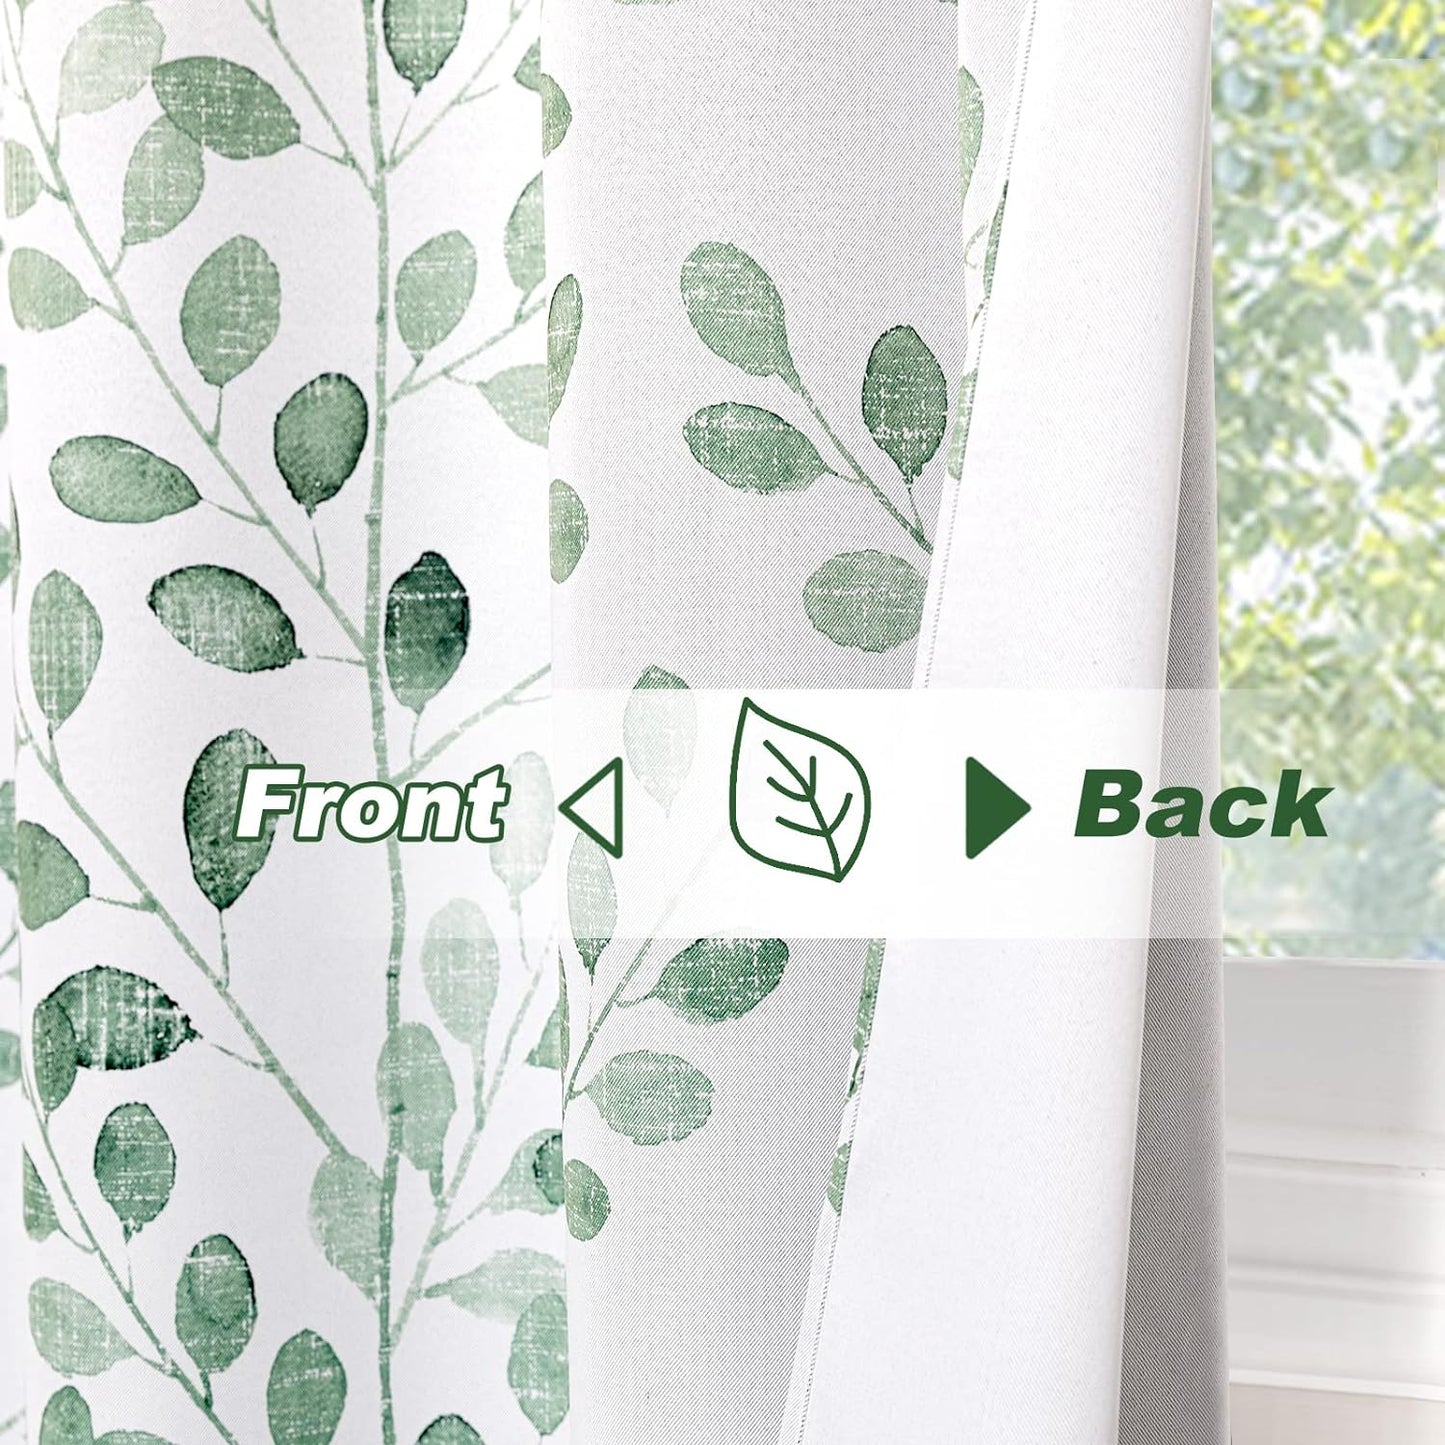 MYSKY HOME Living Room Curtains 84 Inches Long Thermal Insulated Room Darkening Curtains for Dining Room Patio Leaf Pattern Grommet Drapes for Bedroom, Sage, 2 Pieces  MYSKY HOME   